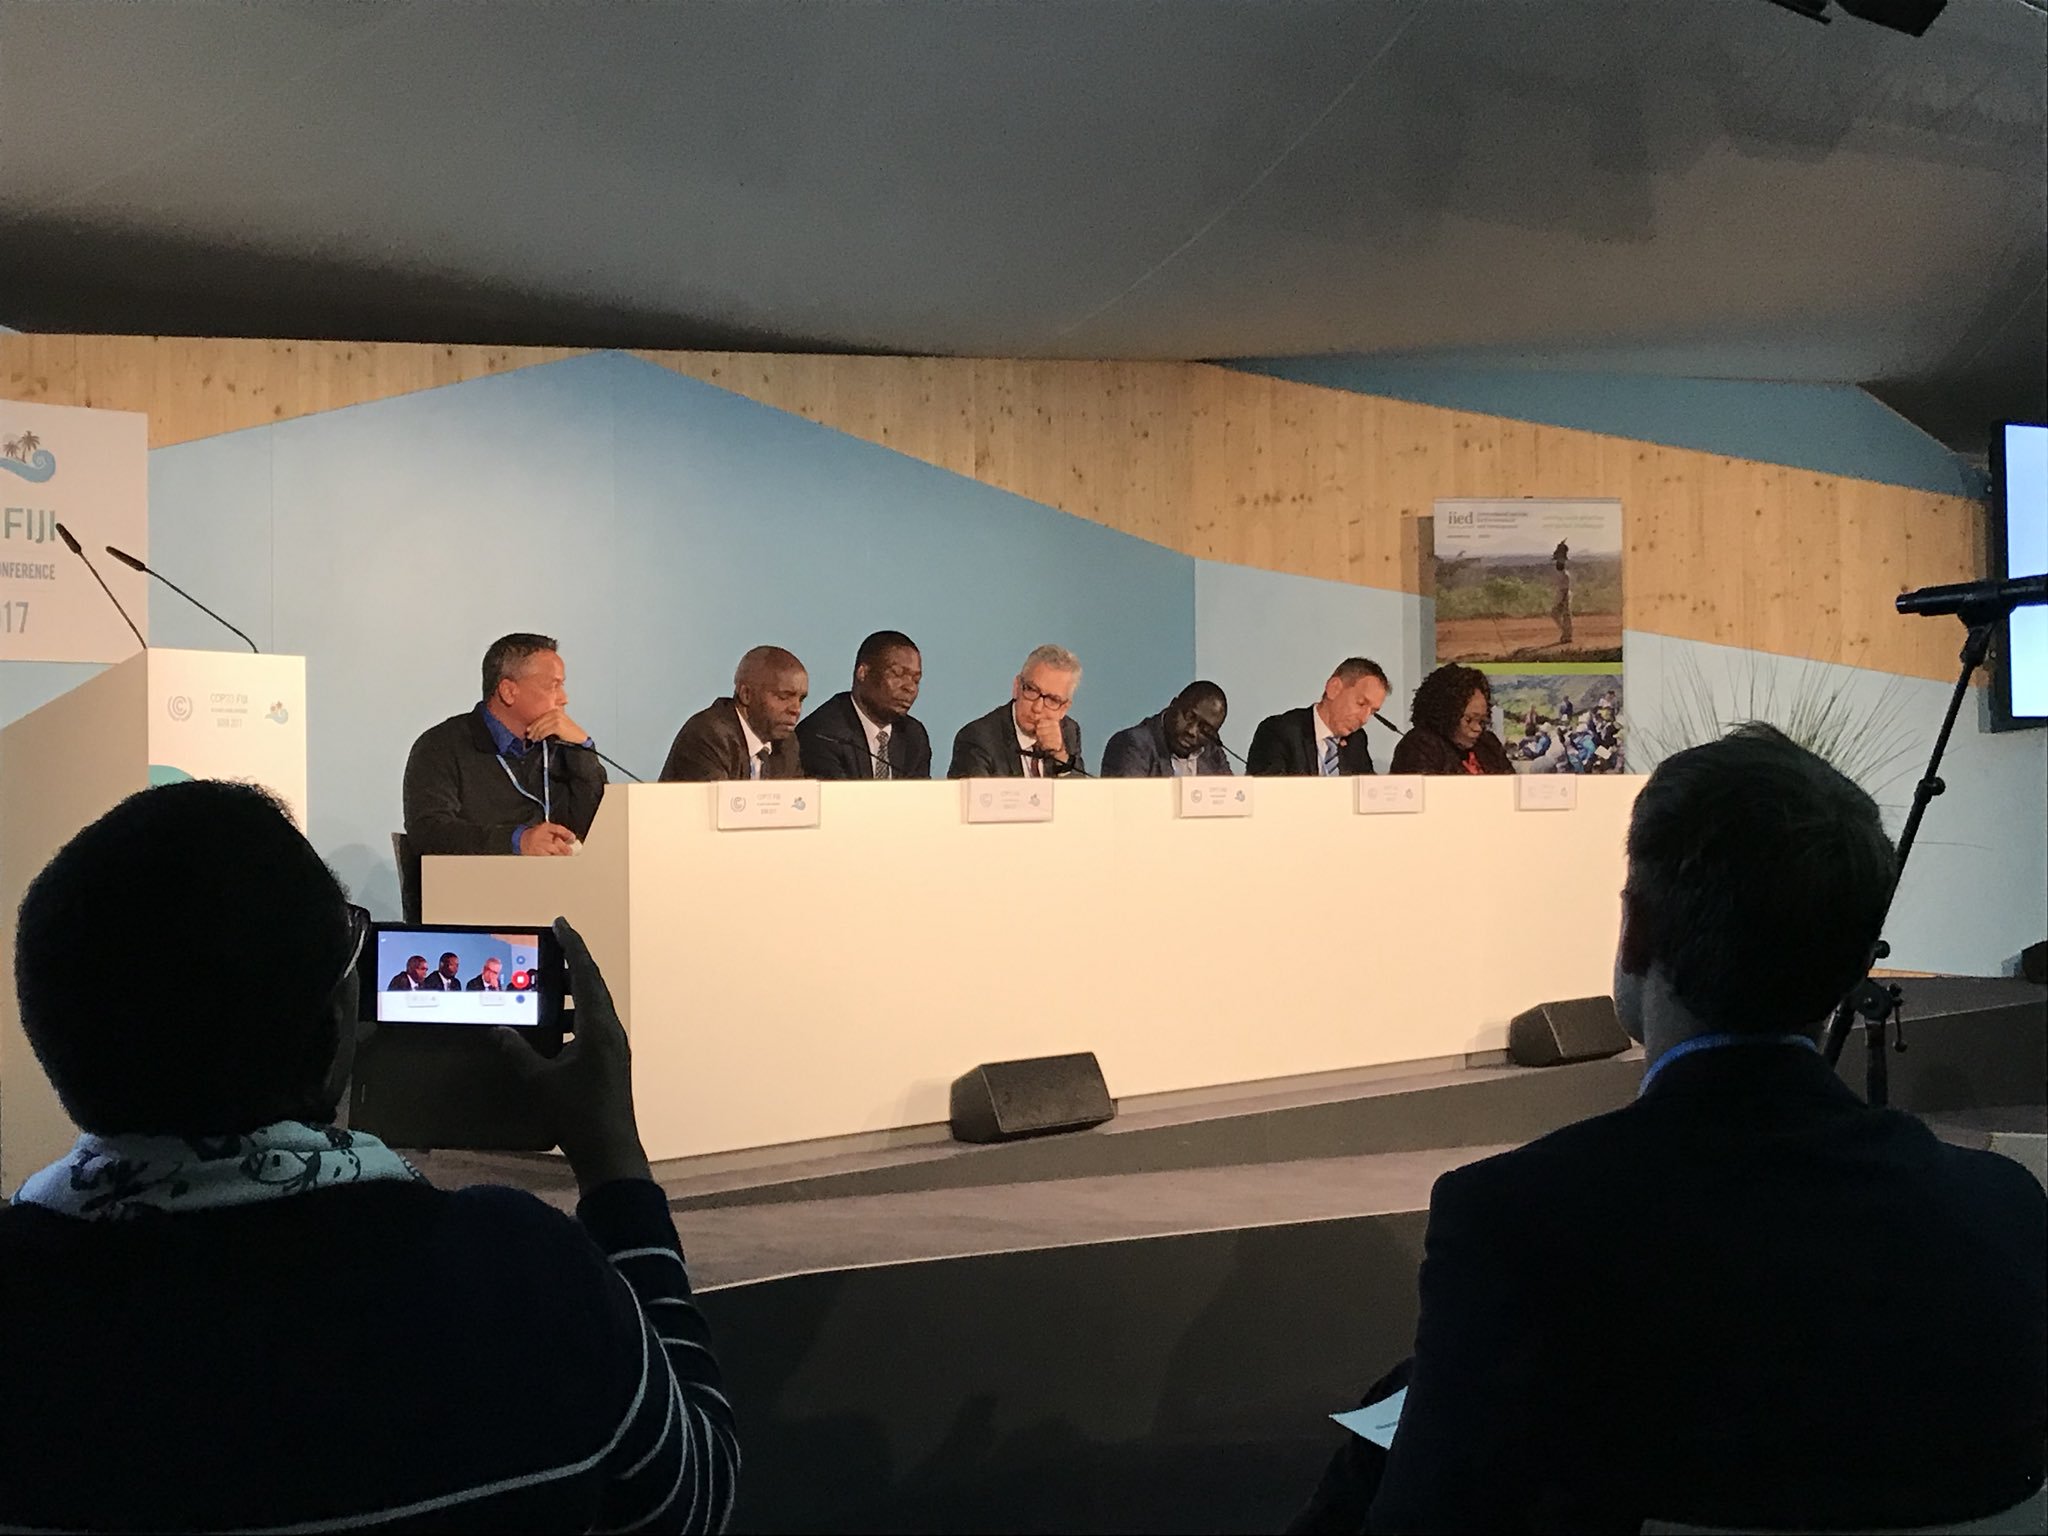 It's at the ward level that our climate finance investments will ultimately be made says Governor of Makwene County in Kenya at @IIED meeting on localizing climate finance @COP23 https://t.co/Ew18JSjRz5